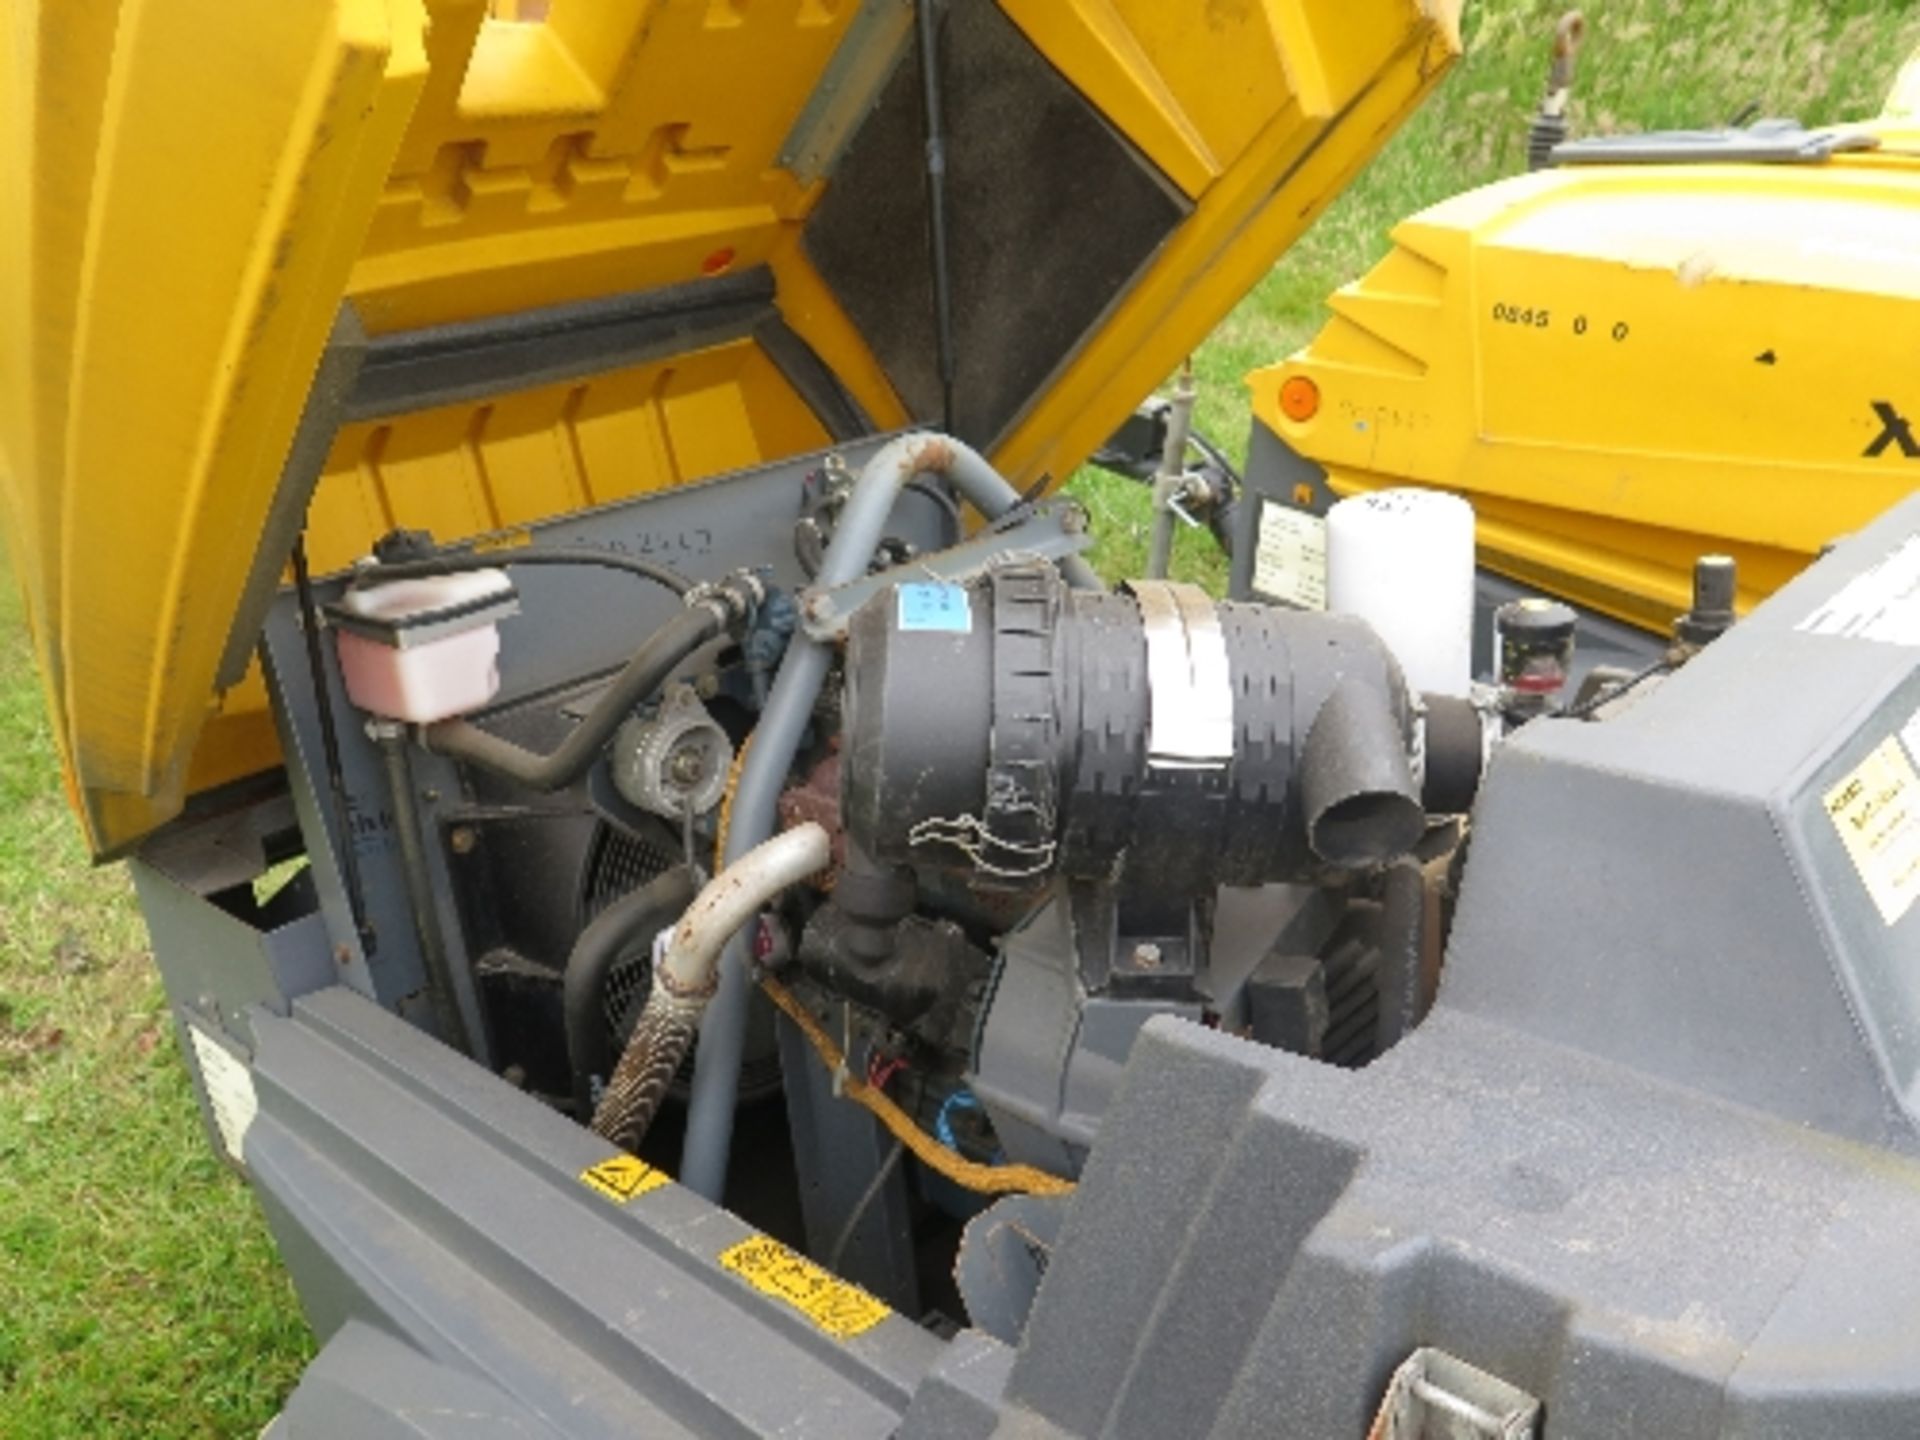 Atlas Copco XAS47 compressor 2008 5002442
325 HOURS - KUBOTA - RUNS AND MAKES AIR
ALL LOTS are - Image 4 of 5